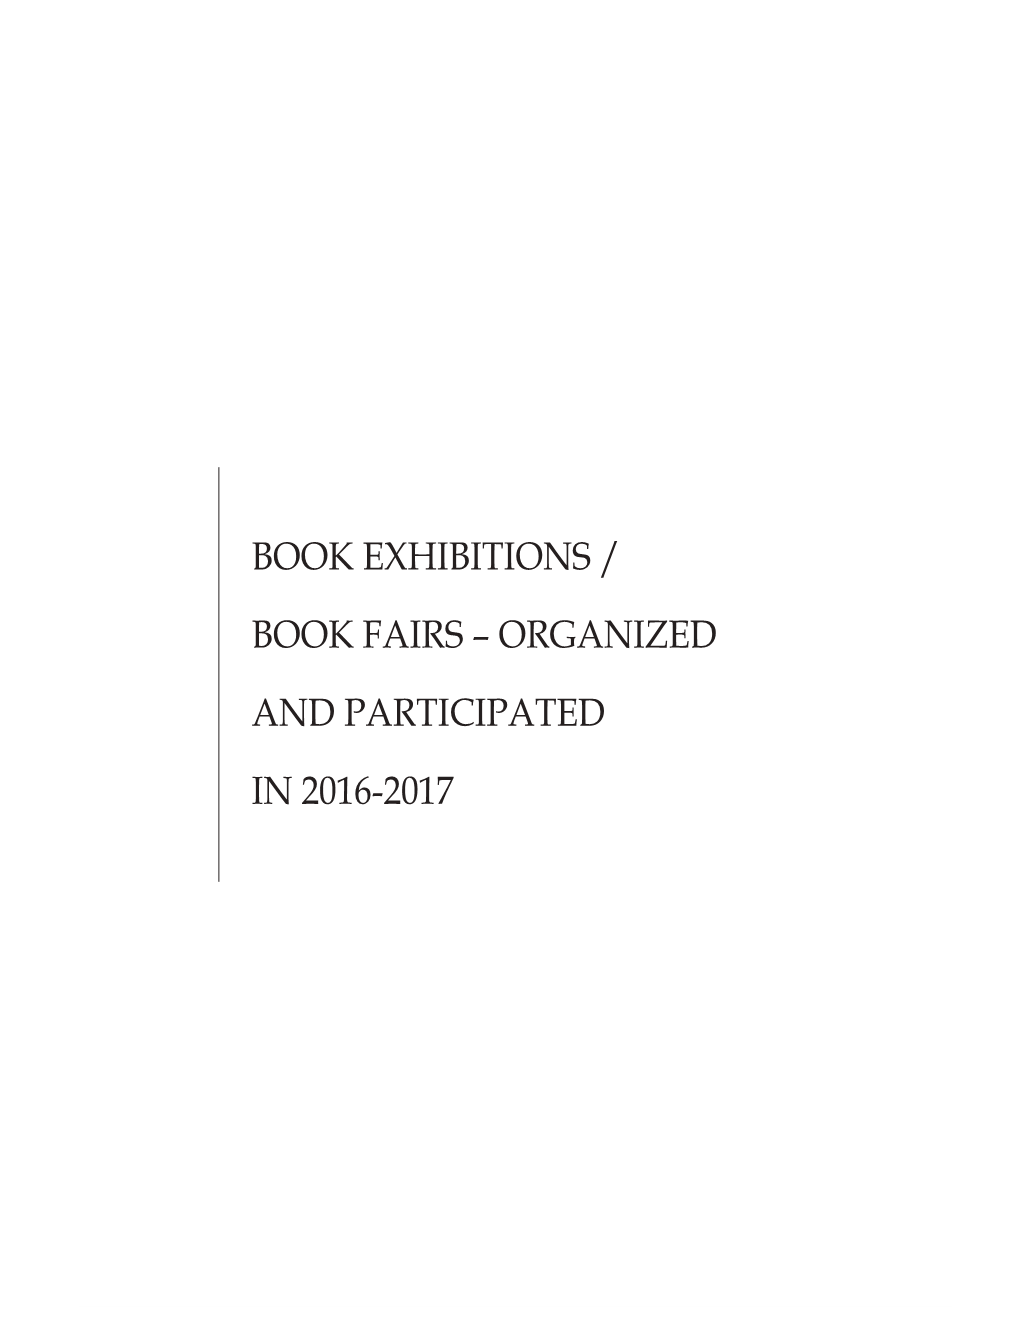 Book Exhibitions / Book Fairs – Organized and Participated in 2016-2017